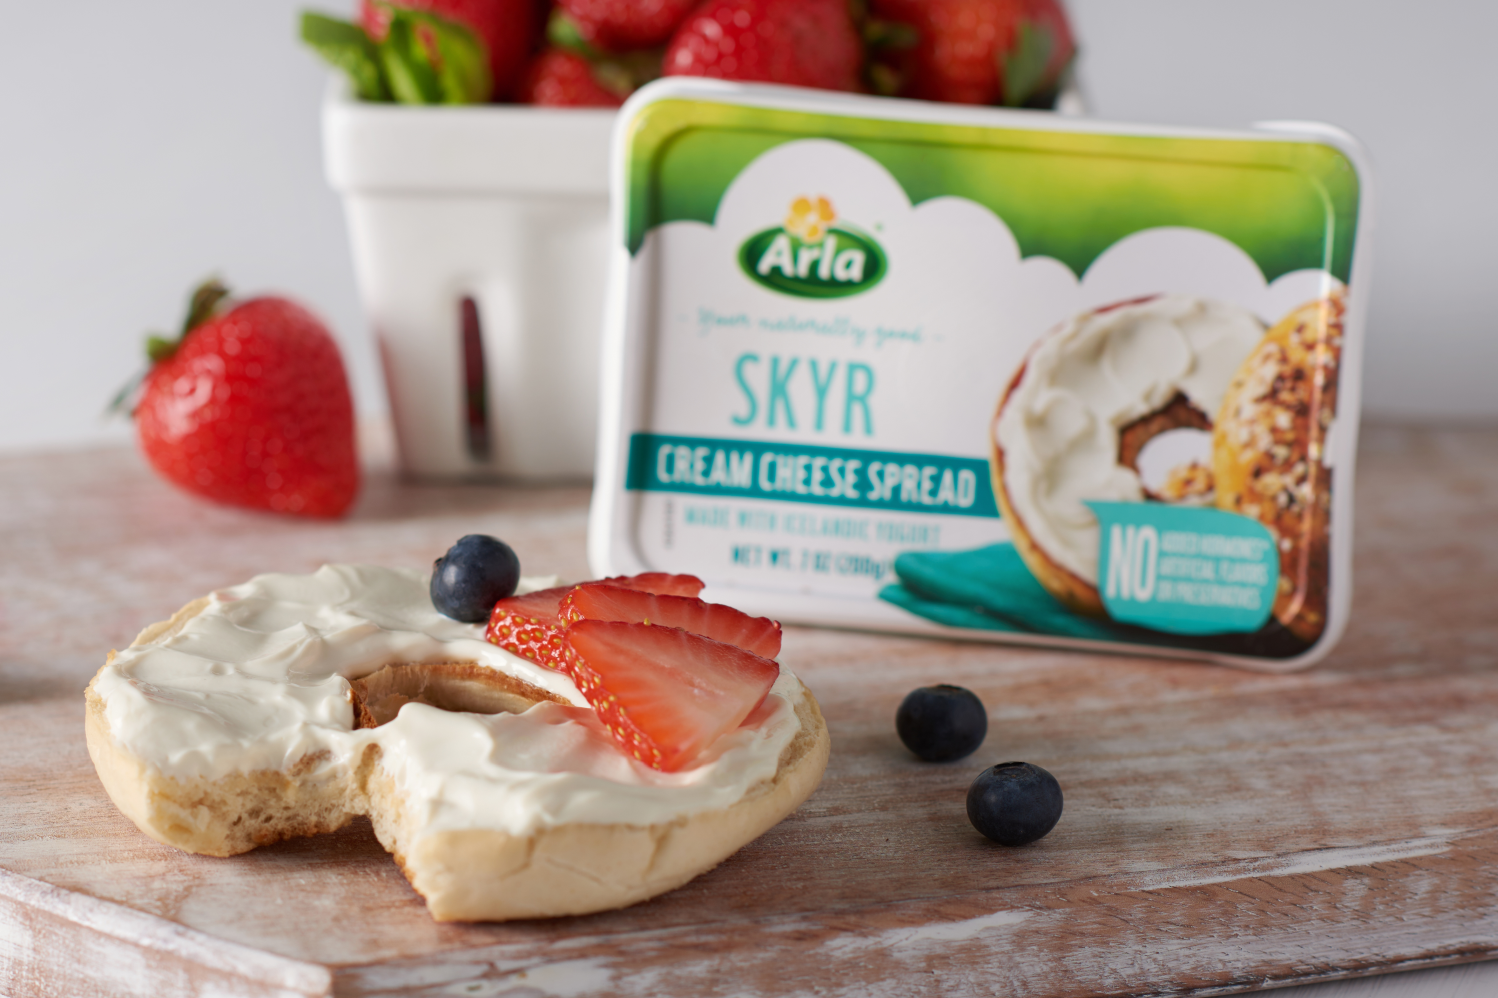 Arla introduces skyr cream get \'We\'re in on early line: that trying to adoption cheese